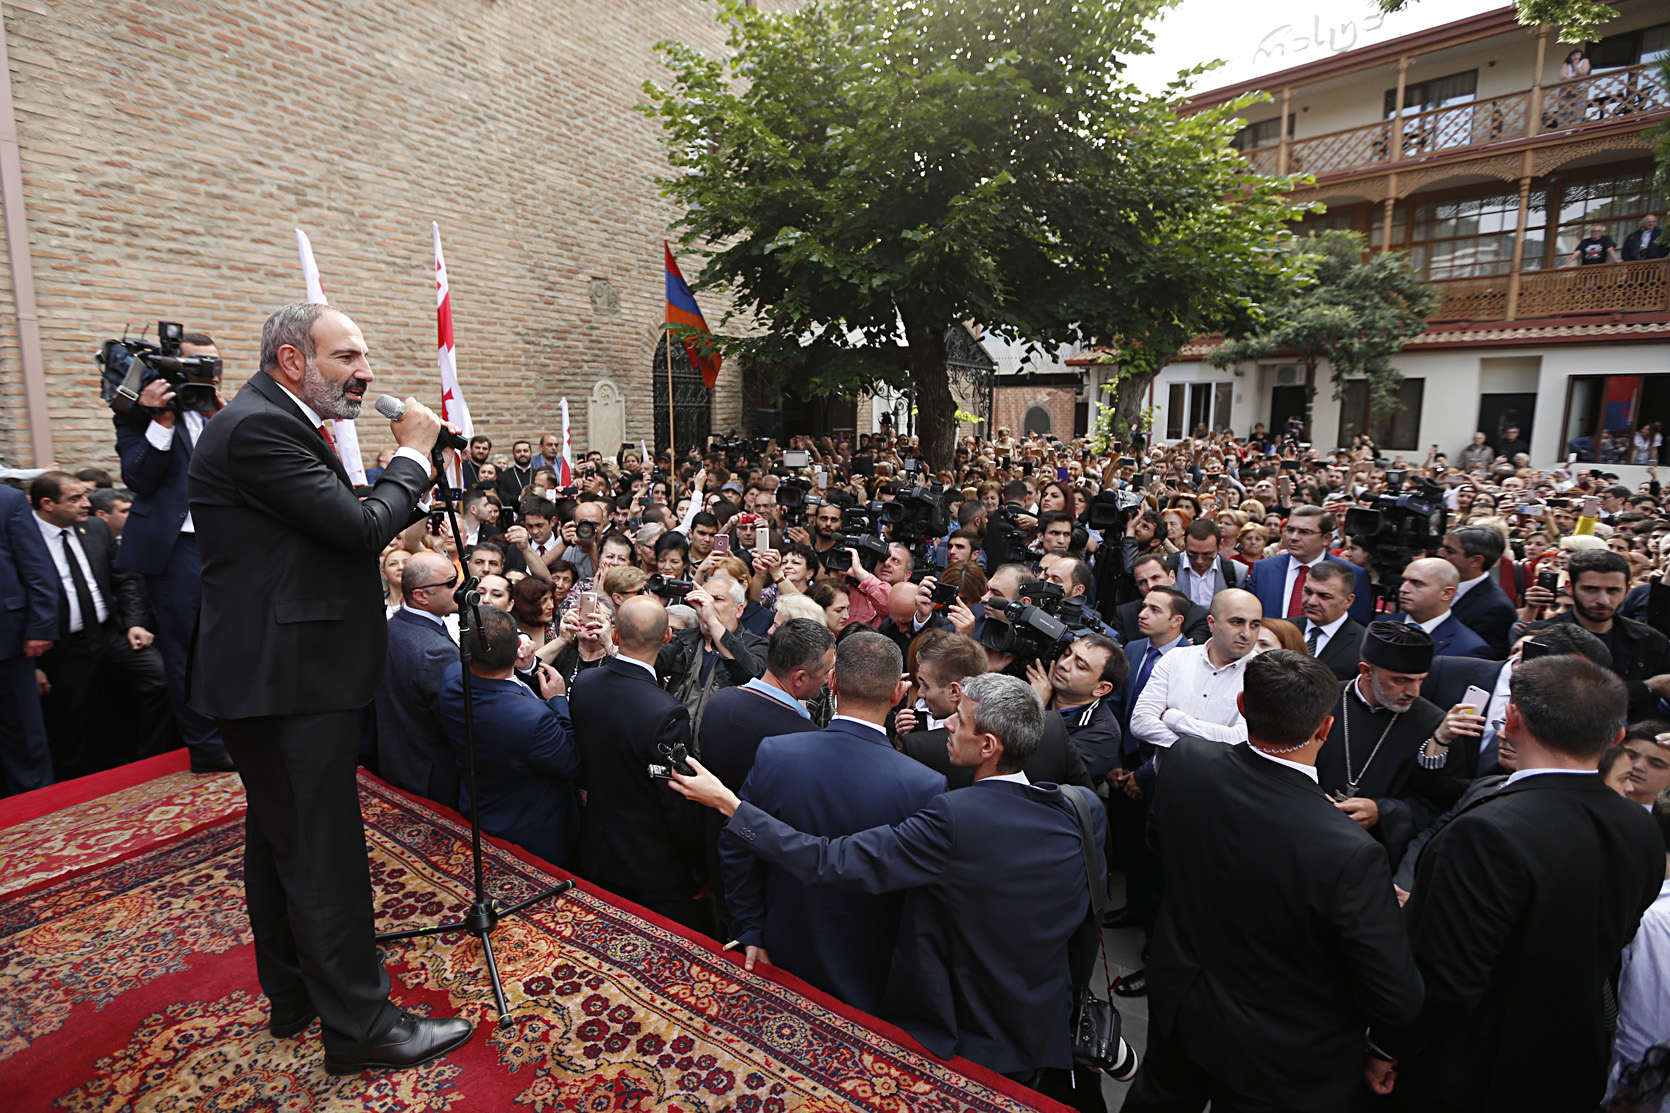 “Armenian-Georgian relations will go strengthening ahead” – Prime Minister Pashinyan meets with Armenian community in Tbilisi